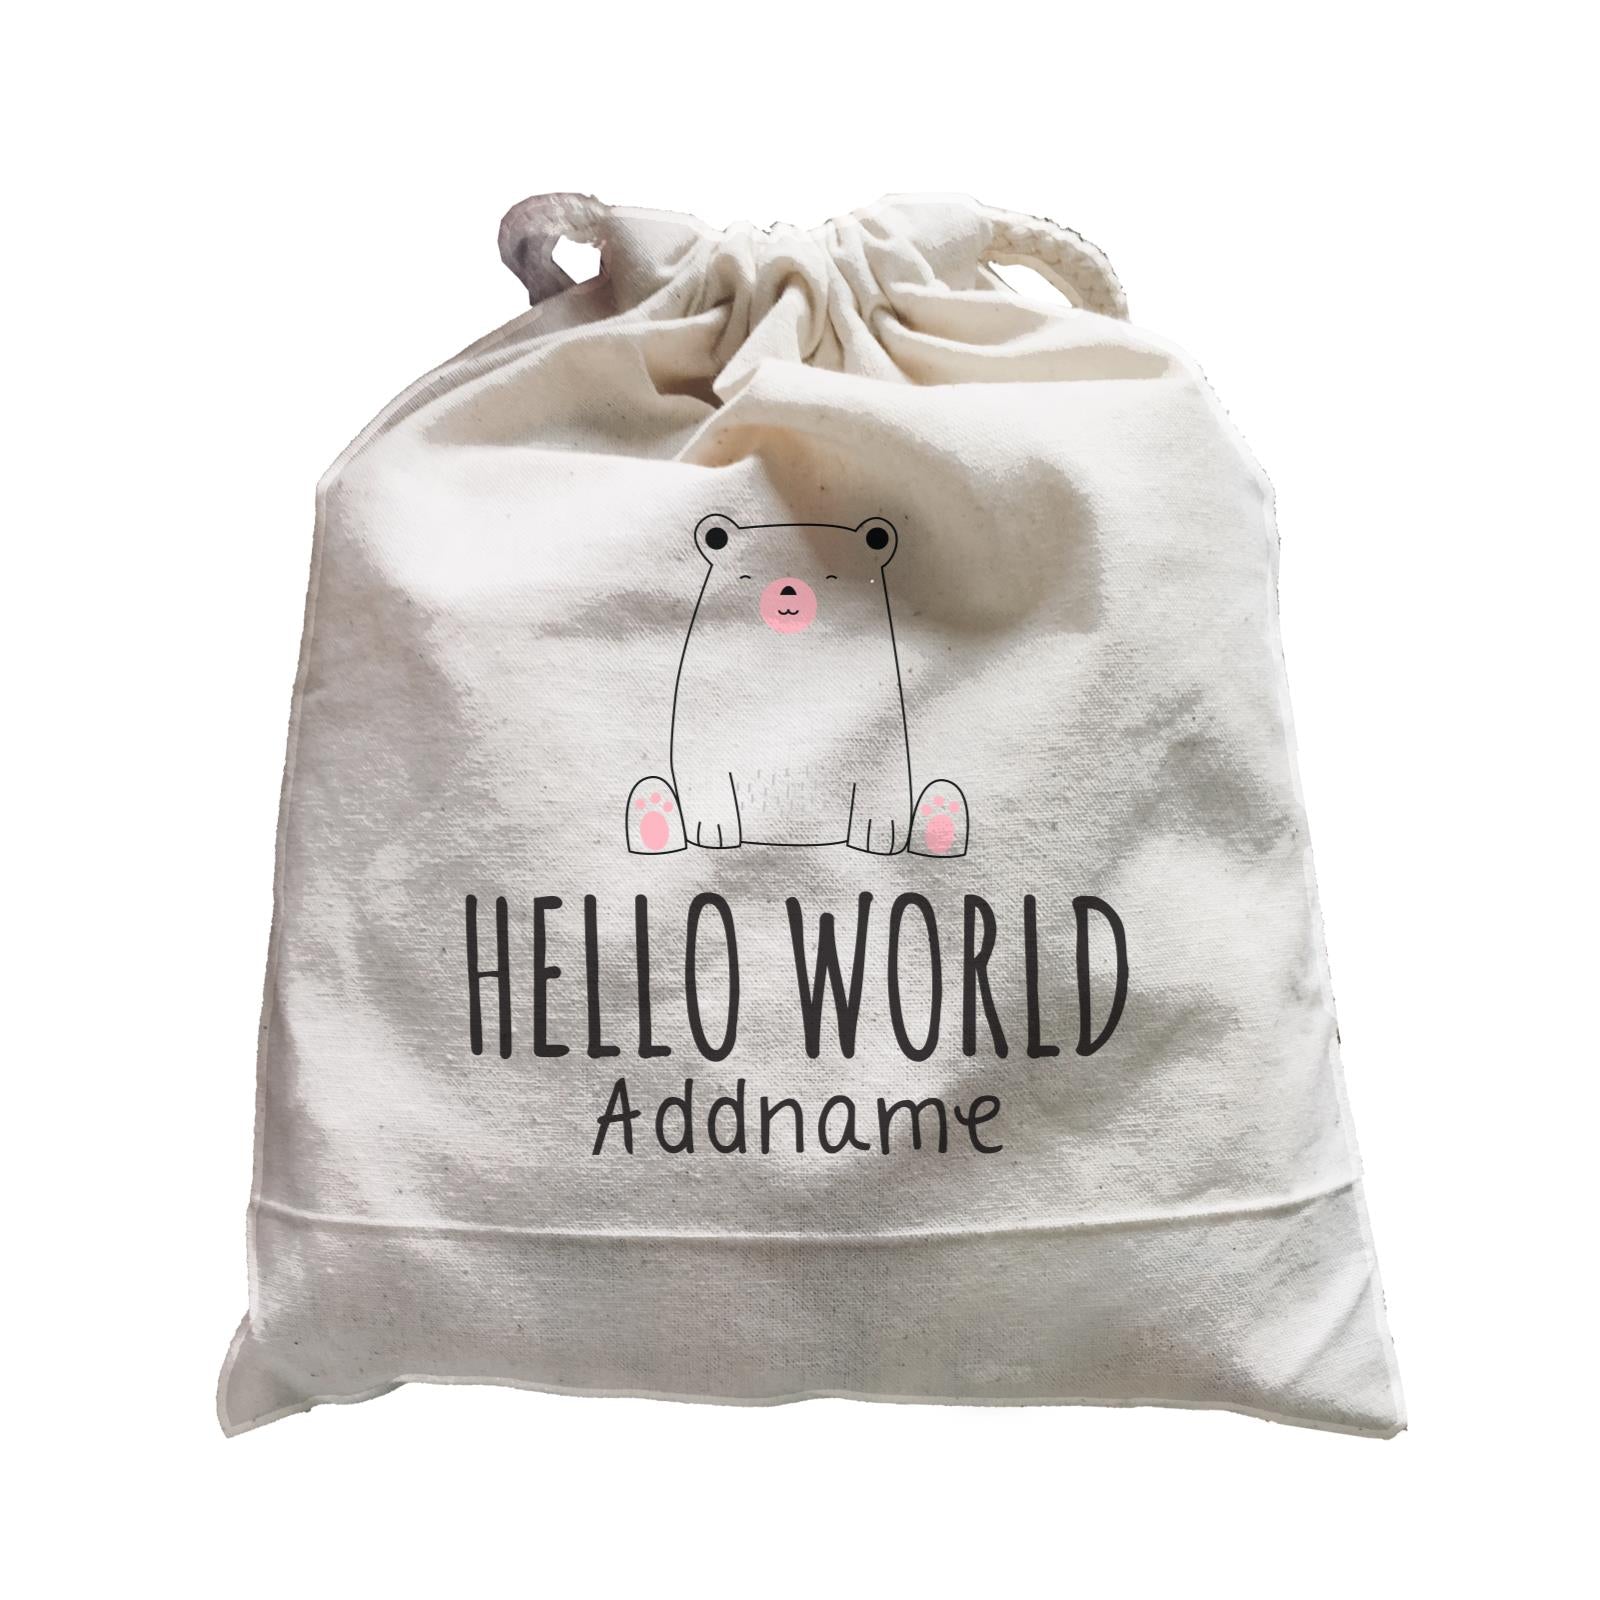 Cute Animals and Friends Series 2 Bear Hello World Addname Satchel